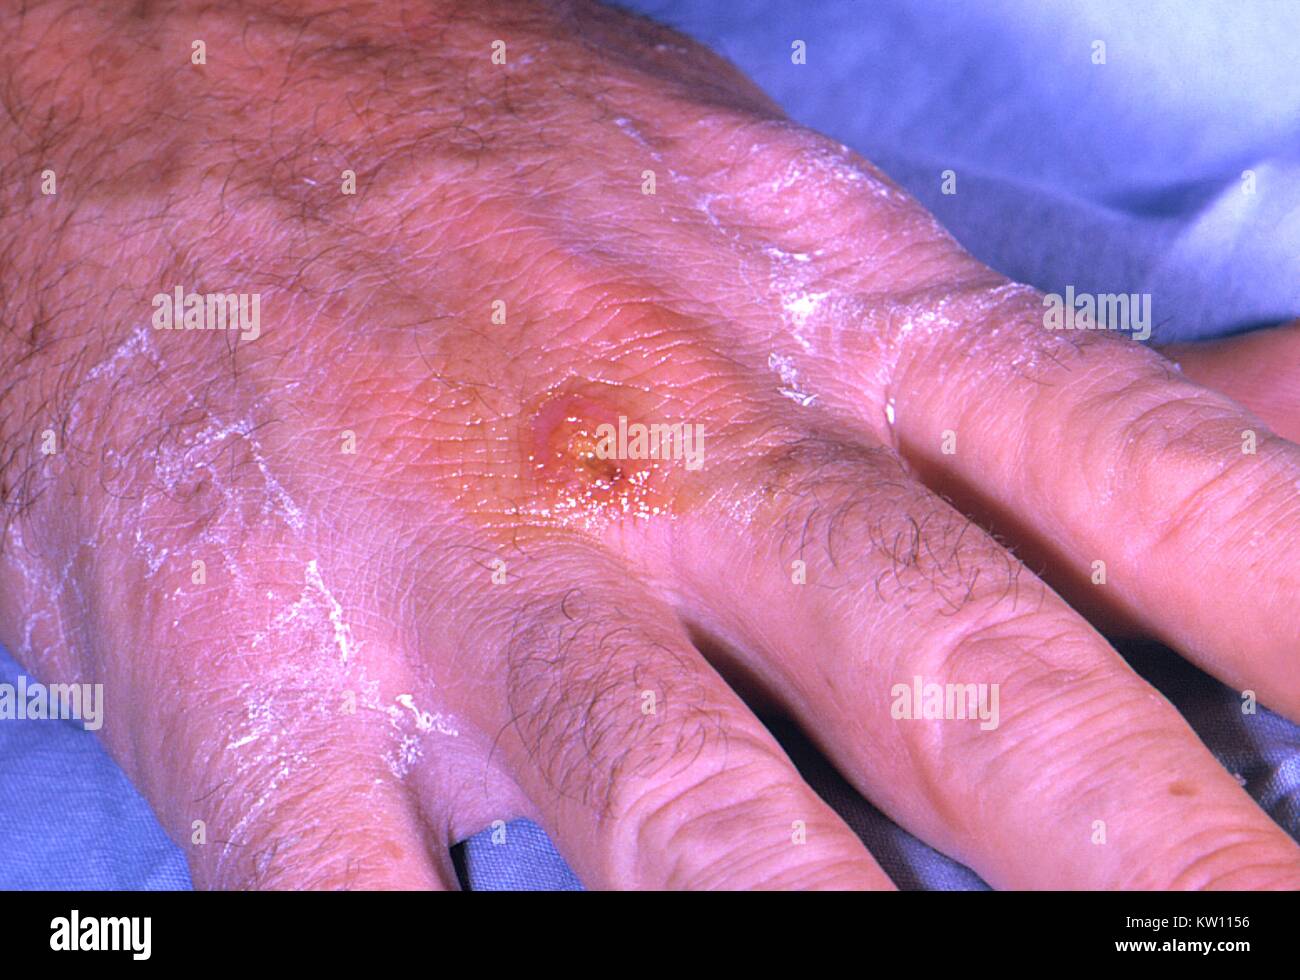 A Tularemia lesion on the dorsal skin of the right hand, caused by the bacterium Francisella tularensis . Tularemia is caused by the bacterium, Francisella tularensis . Symptoms vary depending on how the person was exposed to the disease, and as is shown here, can include skin ulcers. Image courtesy CDC/Dr. Brachman, 1963. Stock Photo